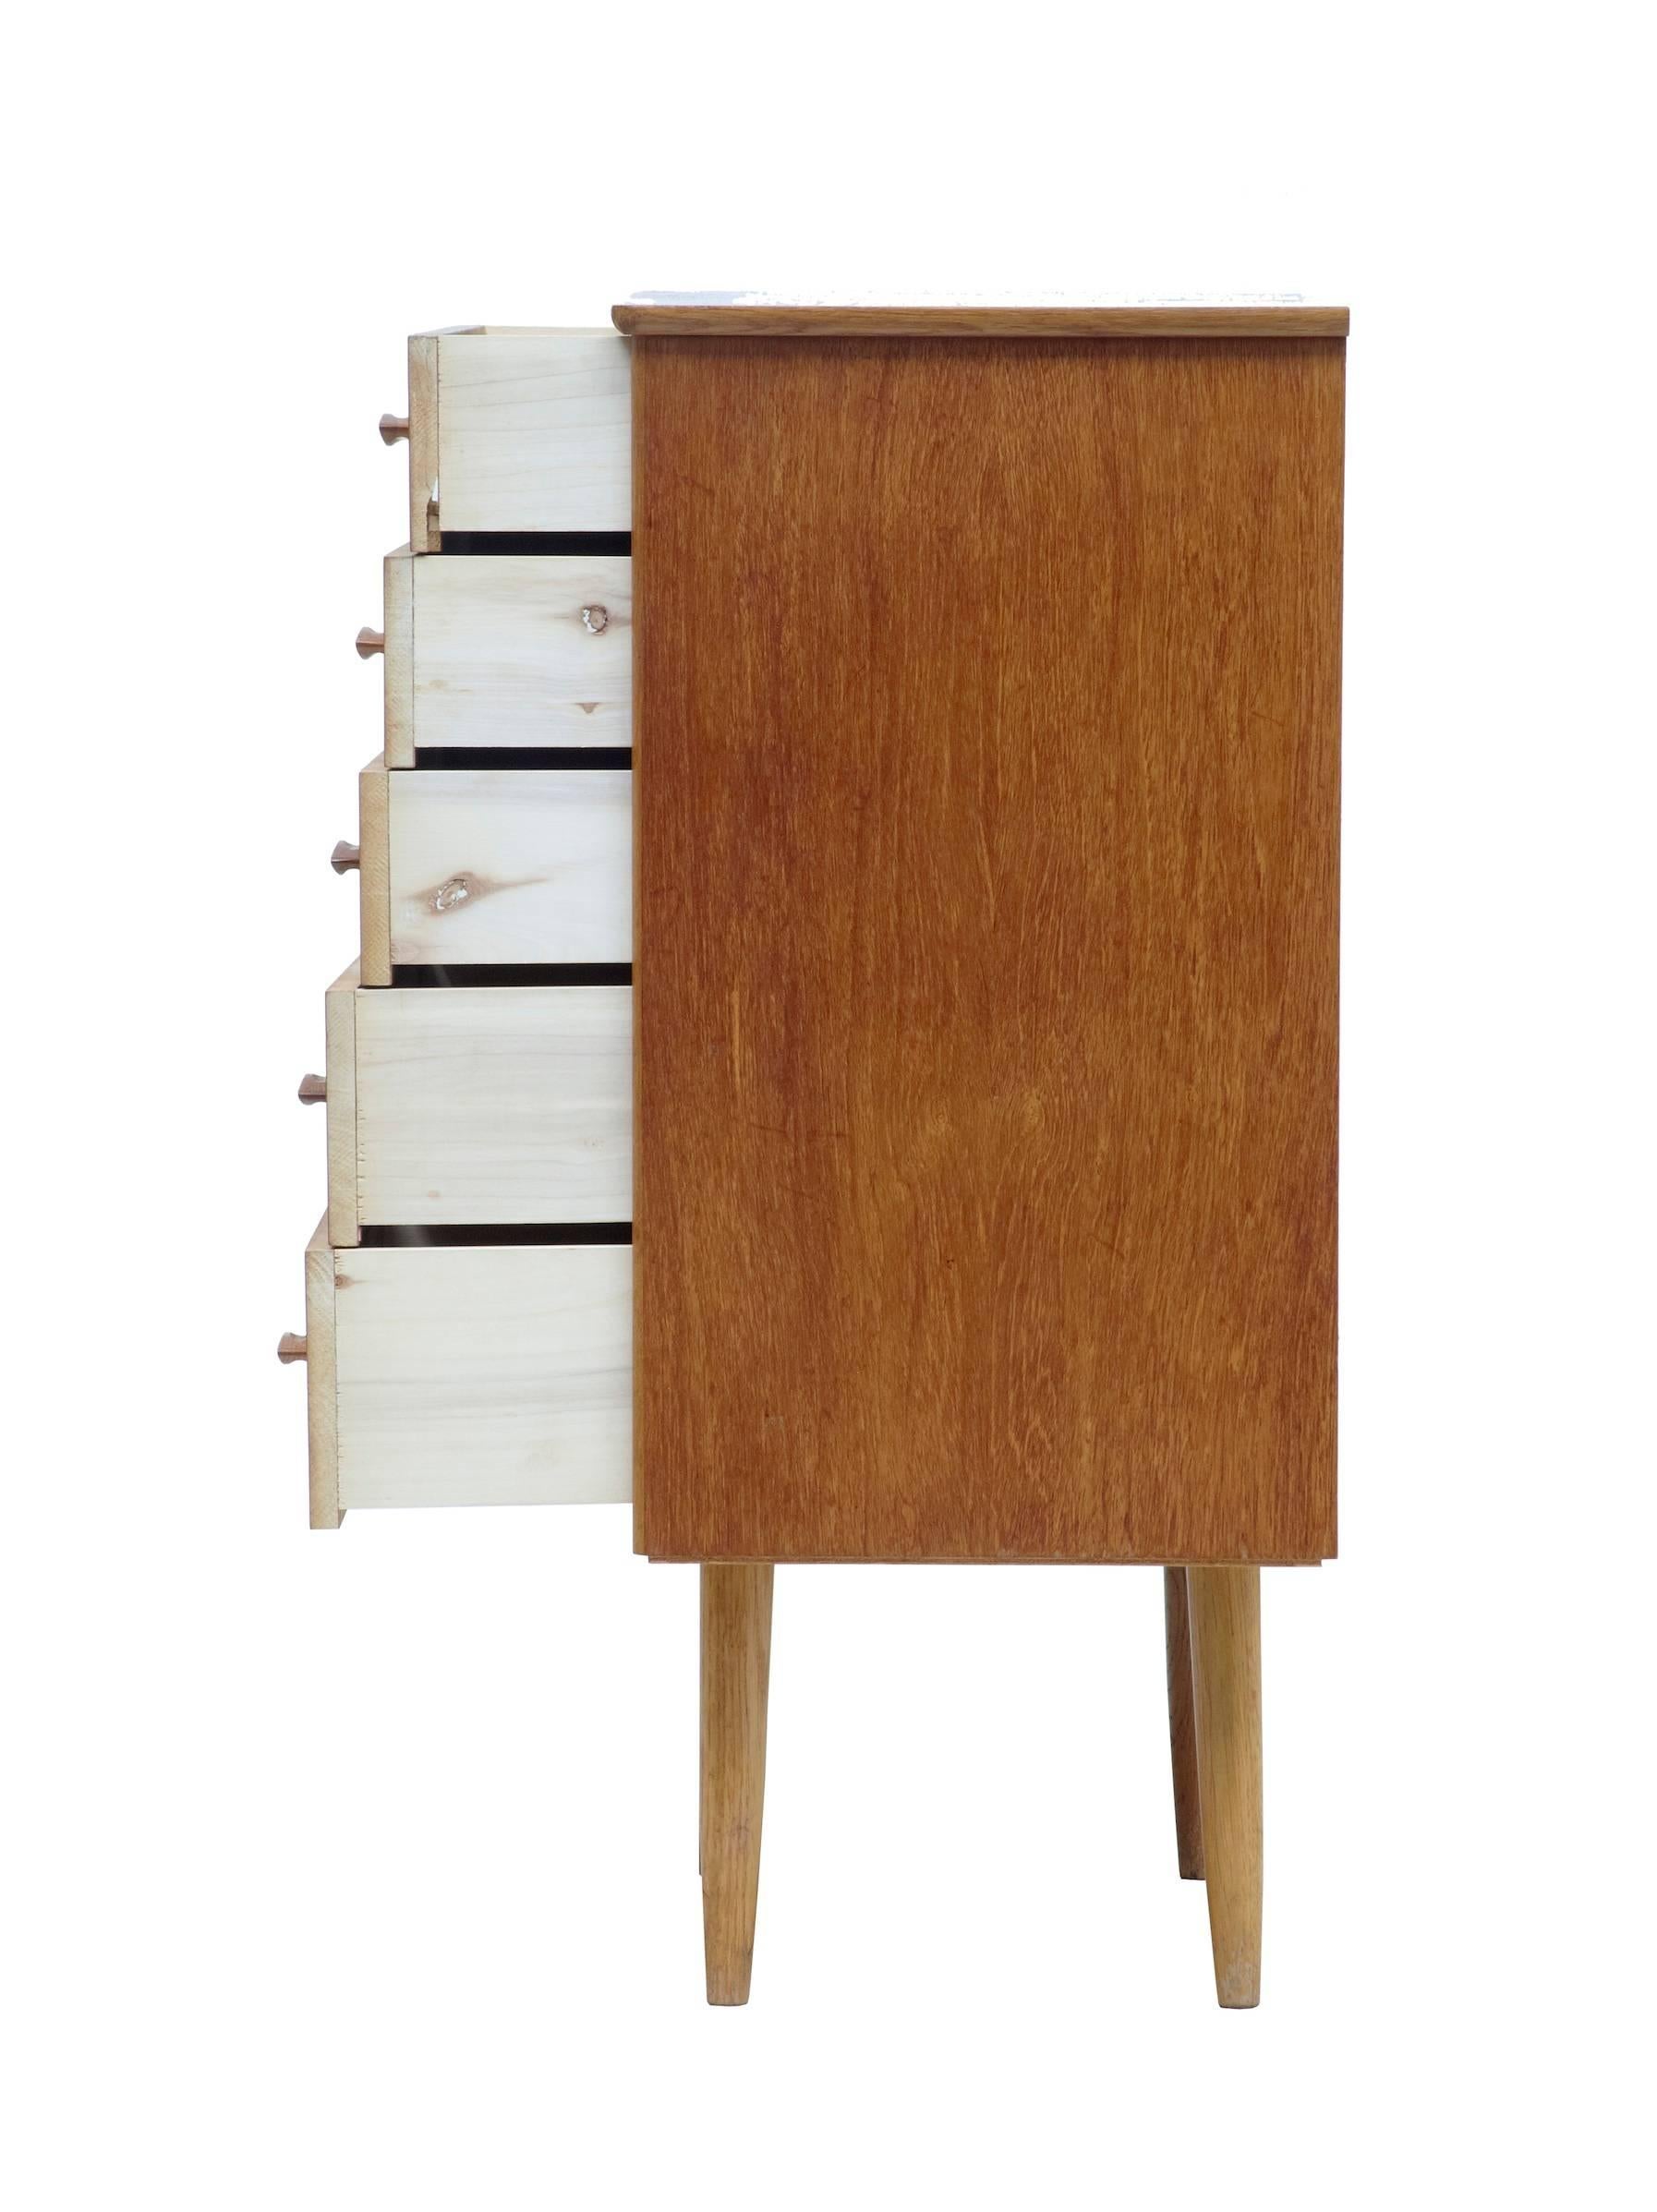 Small five-drawer chest of drawers, circa 1960. Fitted with contrasting light oak handles. Light veneer damage to four-drawer (photographed) surface marks and staining to top surface.

Measures: Height: 28 1/2